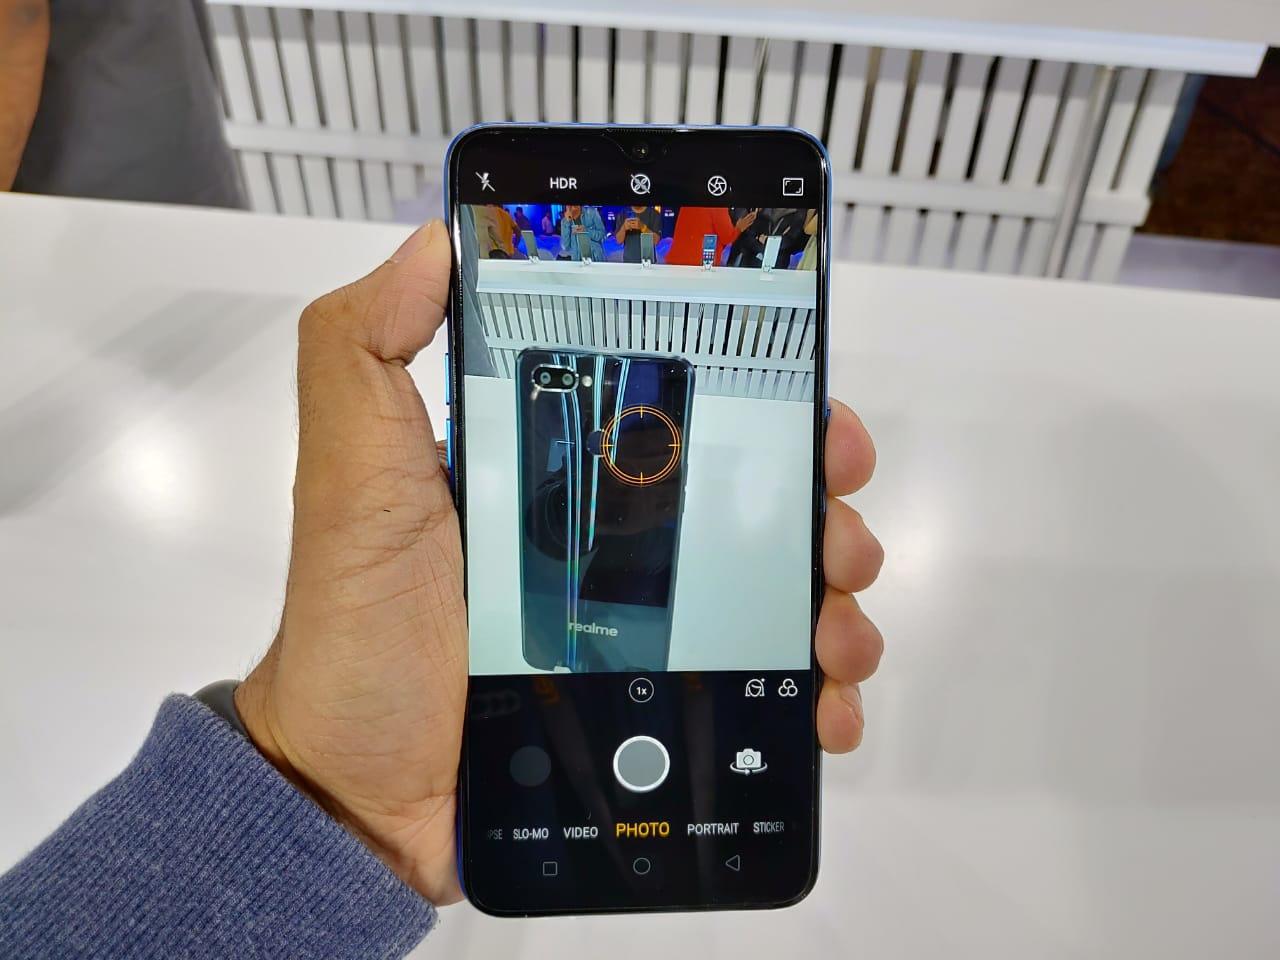 OPPO Realme U1 Hands-On Review - Camera